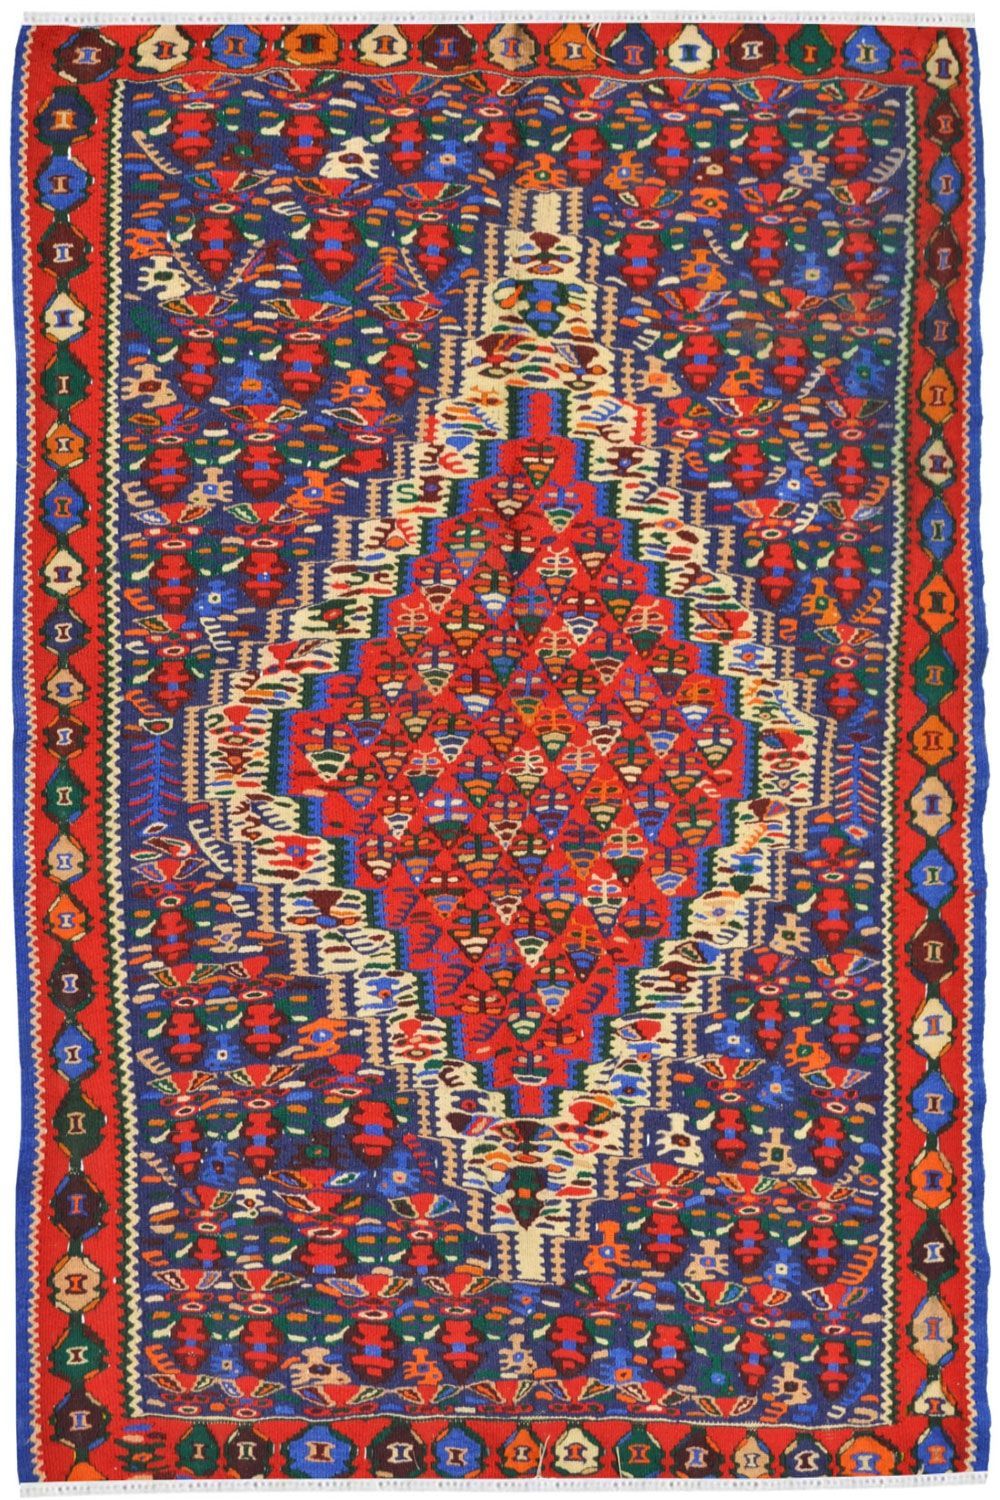 Jewel Moroccan Rug | Kilim Rugs And Carpets Online | Rugsandbeyond Throughout Moroccan Rugs (View 4 of 15)